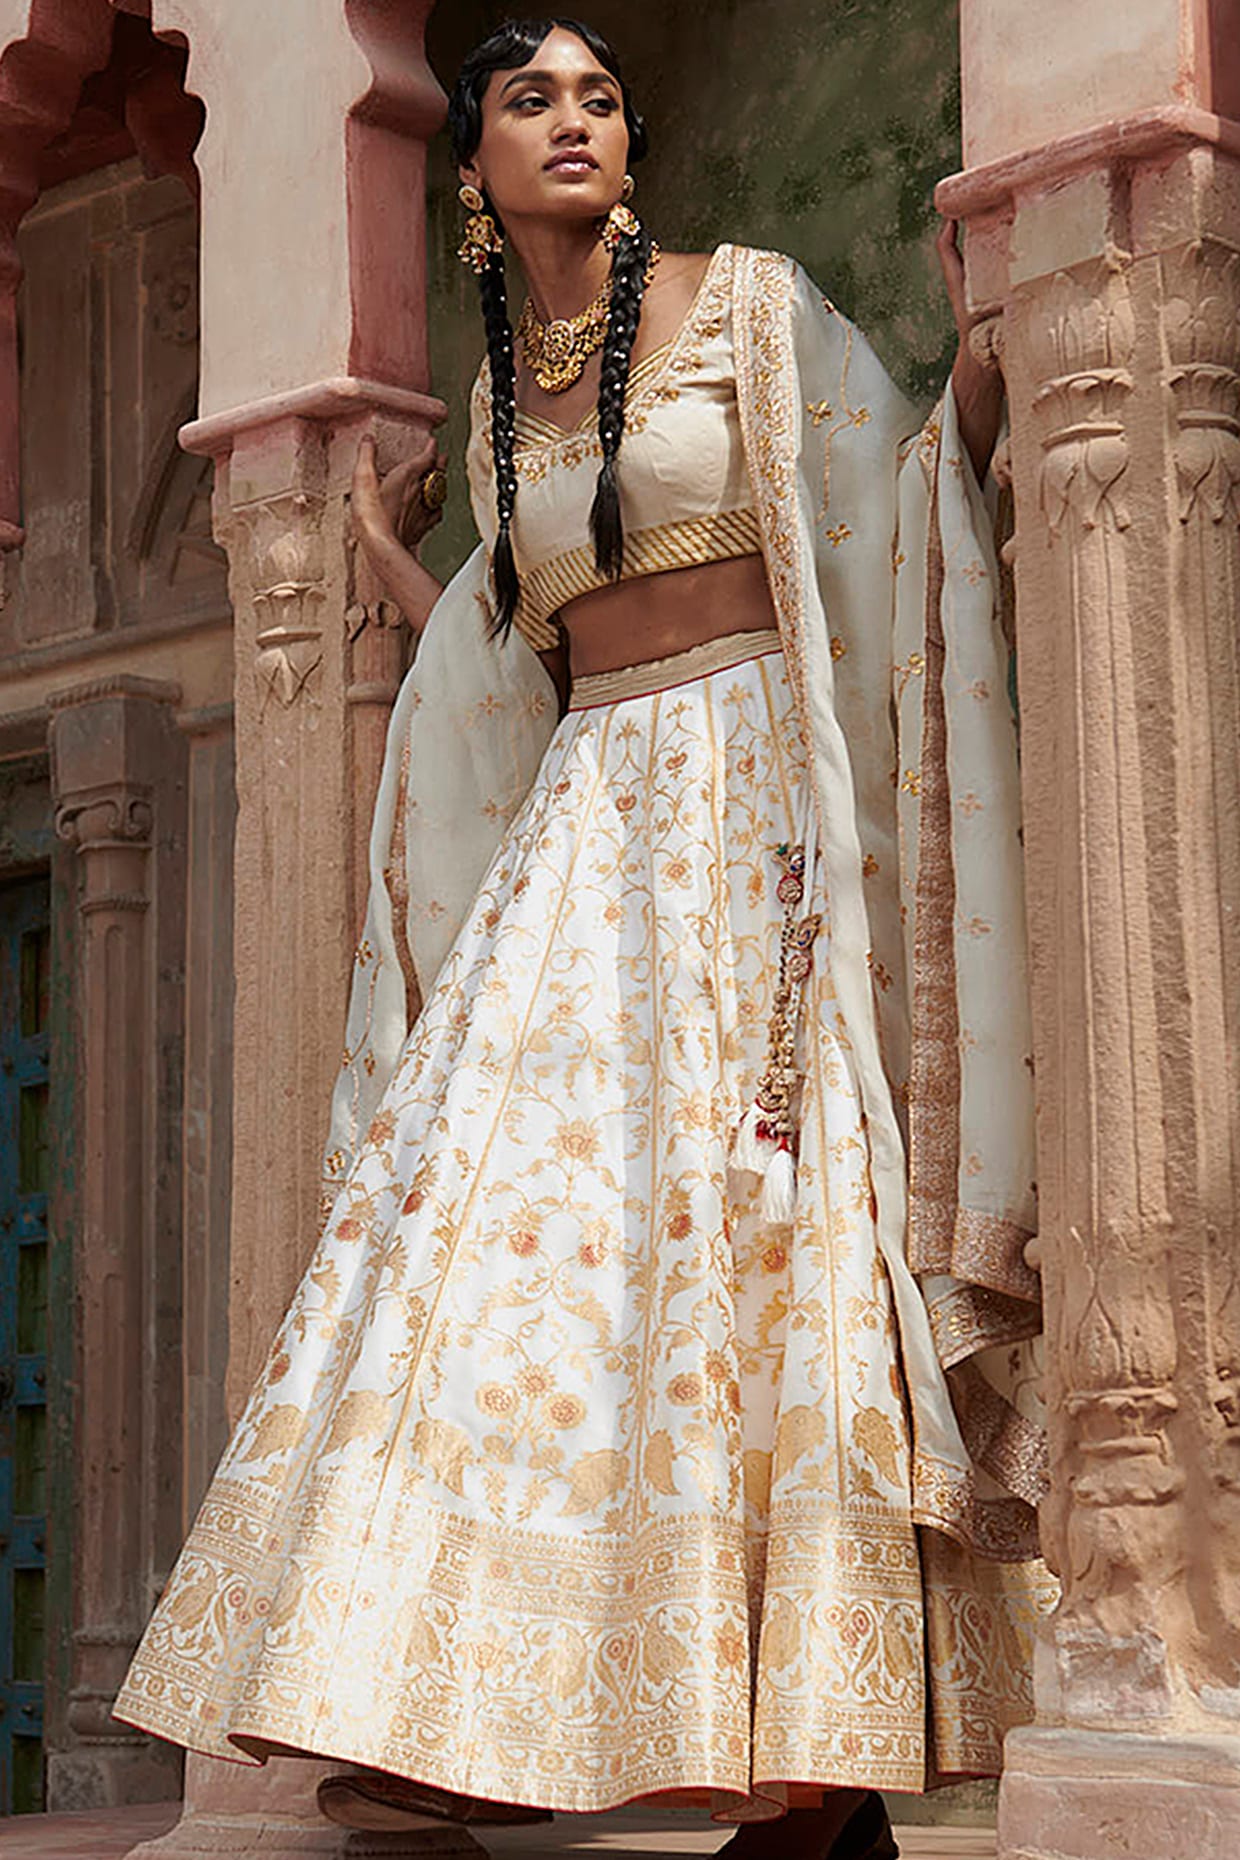 What are some styling tips for a banarasi lehenga? - Quora